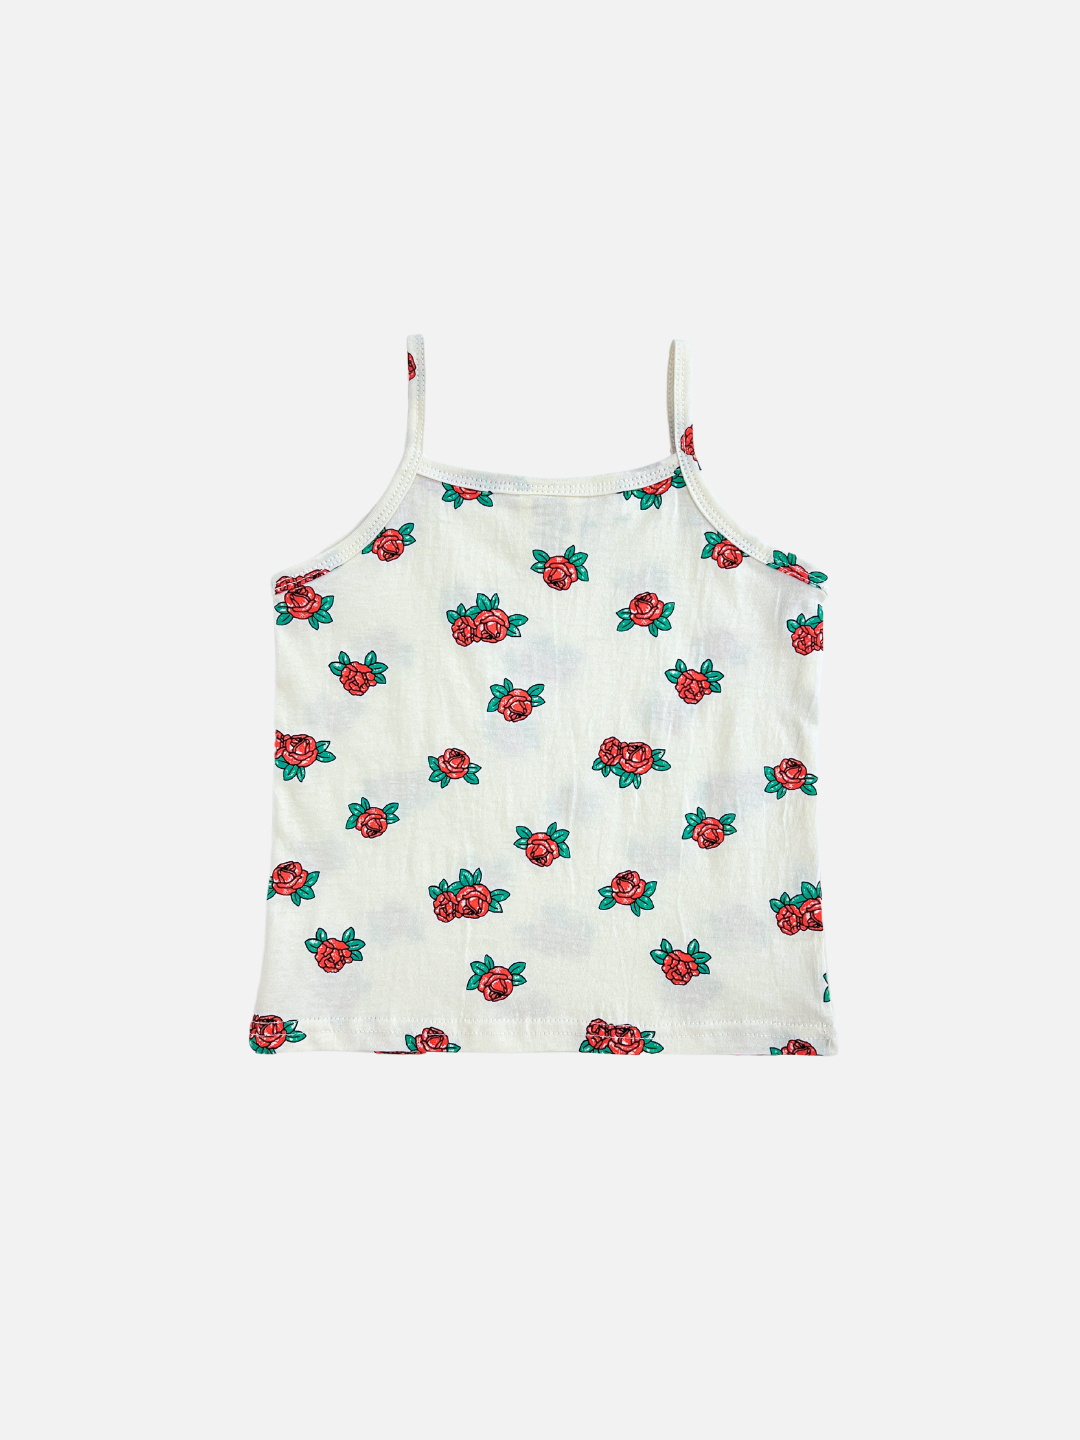 Back view of the kid's roses tank top in White with red roses all-over print